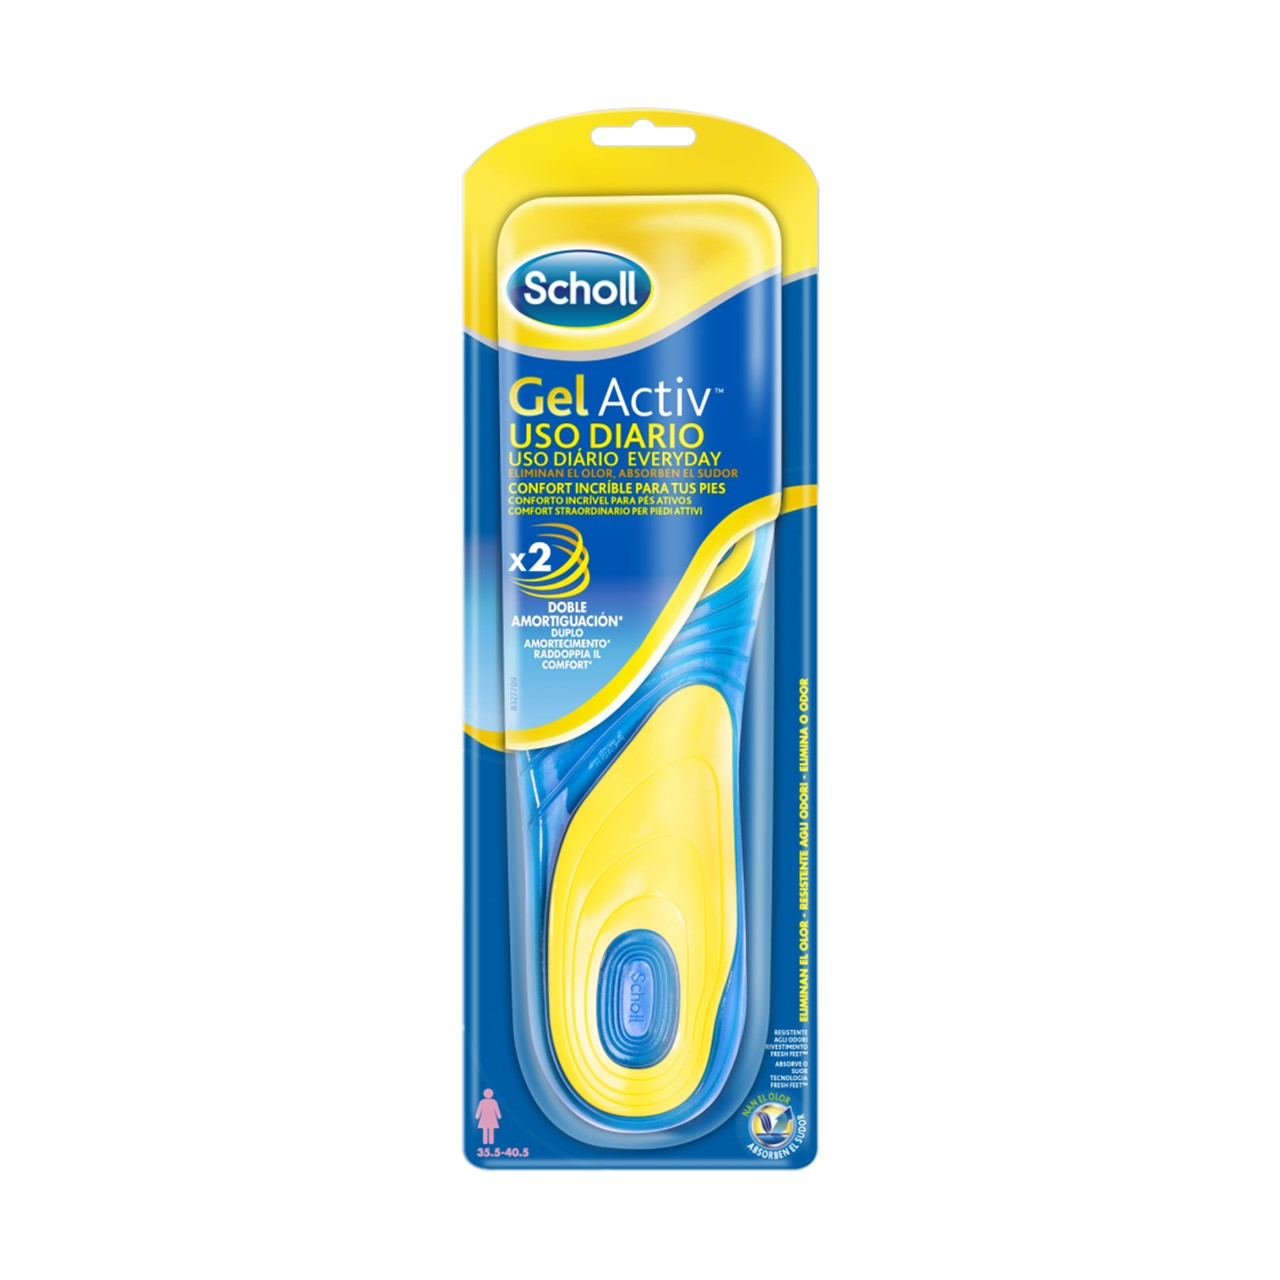 Dr Scholl GelActiv Daily Use Insoles Women 35.5-40.5